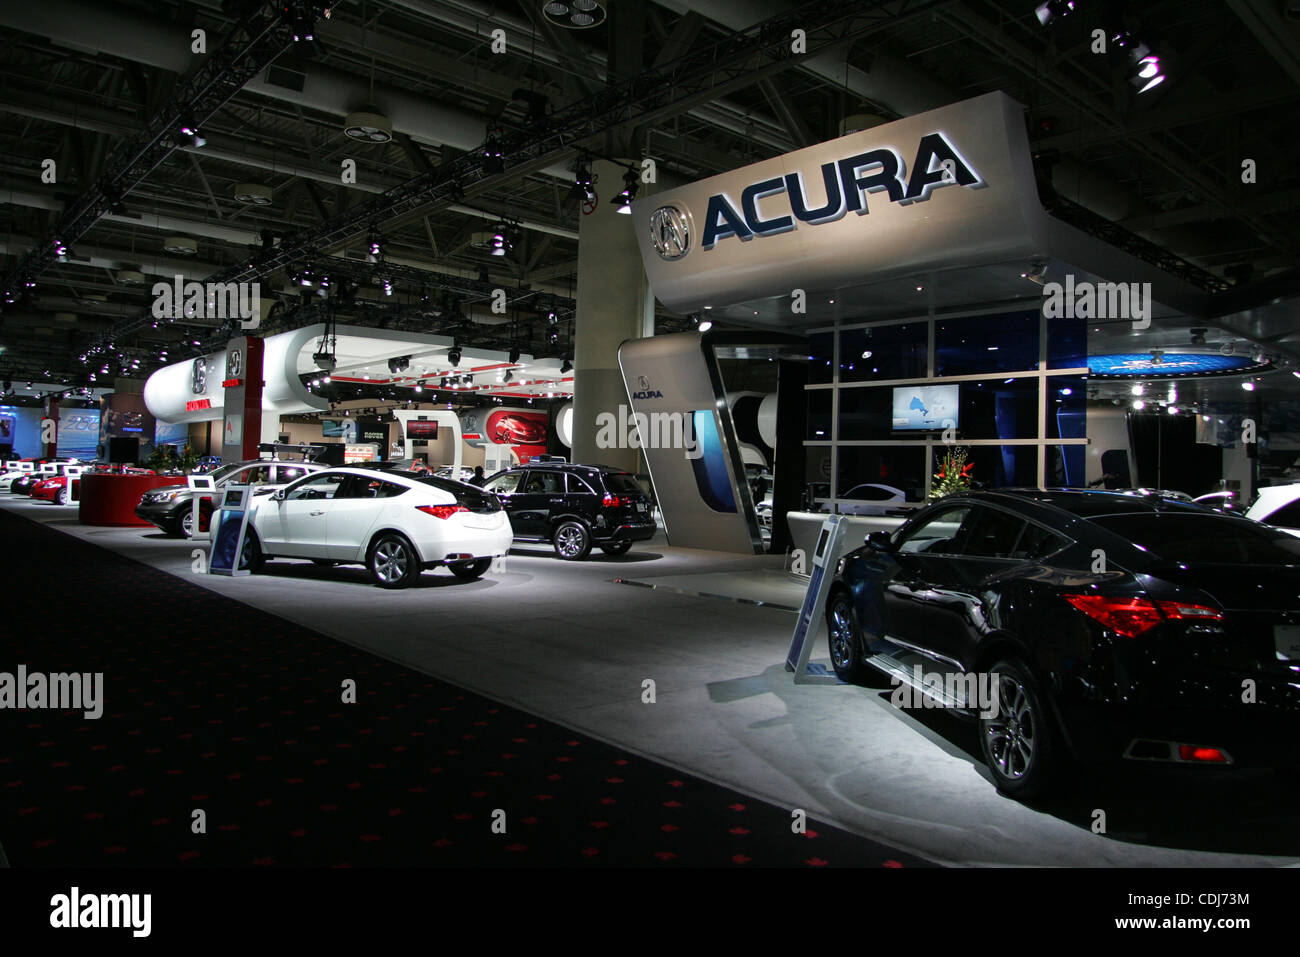 February 17, 2011 - Toronto, Ontario, Canada - The Acura display at the Canadian International Auto Show media day at the Metro Convention Centre in Toronto. (Credit Image: © Steve Dormer/Southcreek Global/ZUMAPRESS.com) Stock Photo